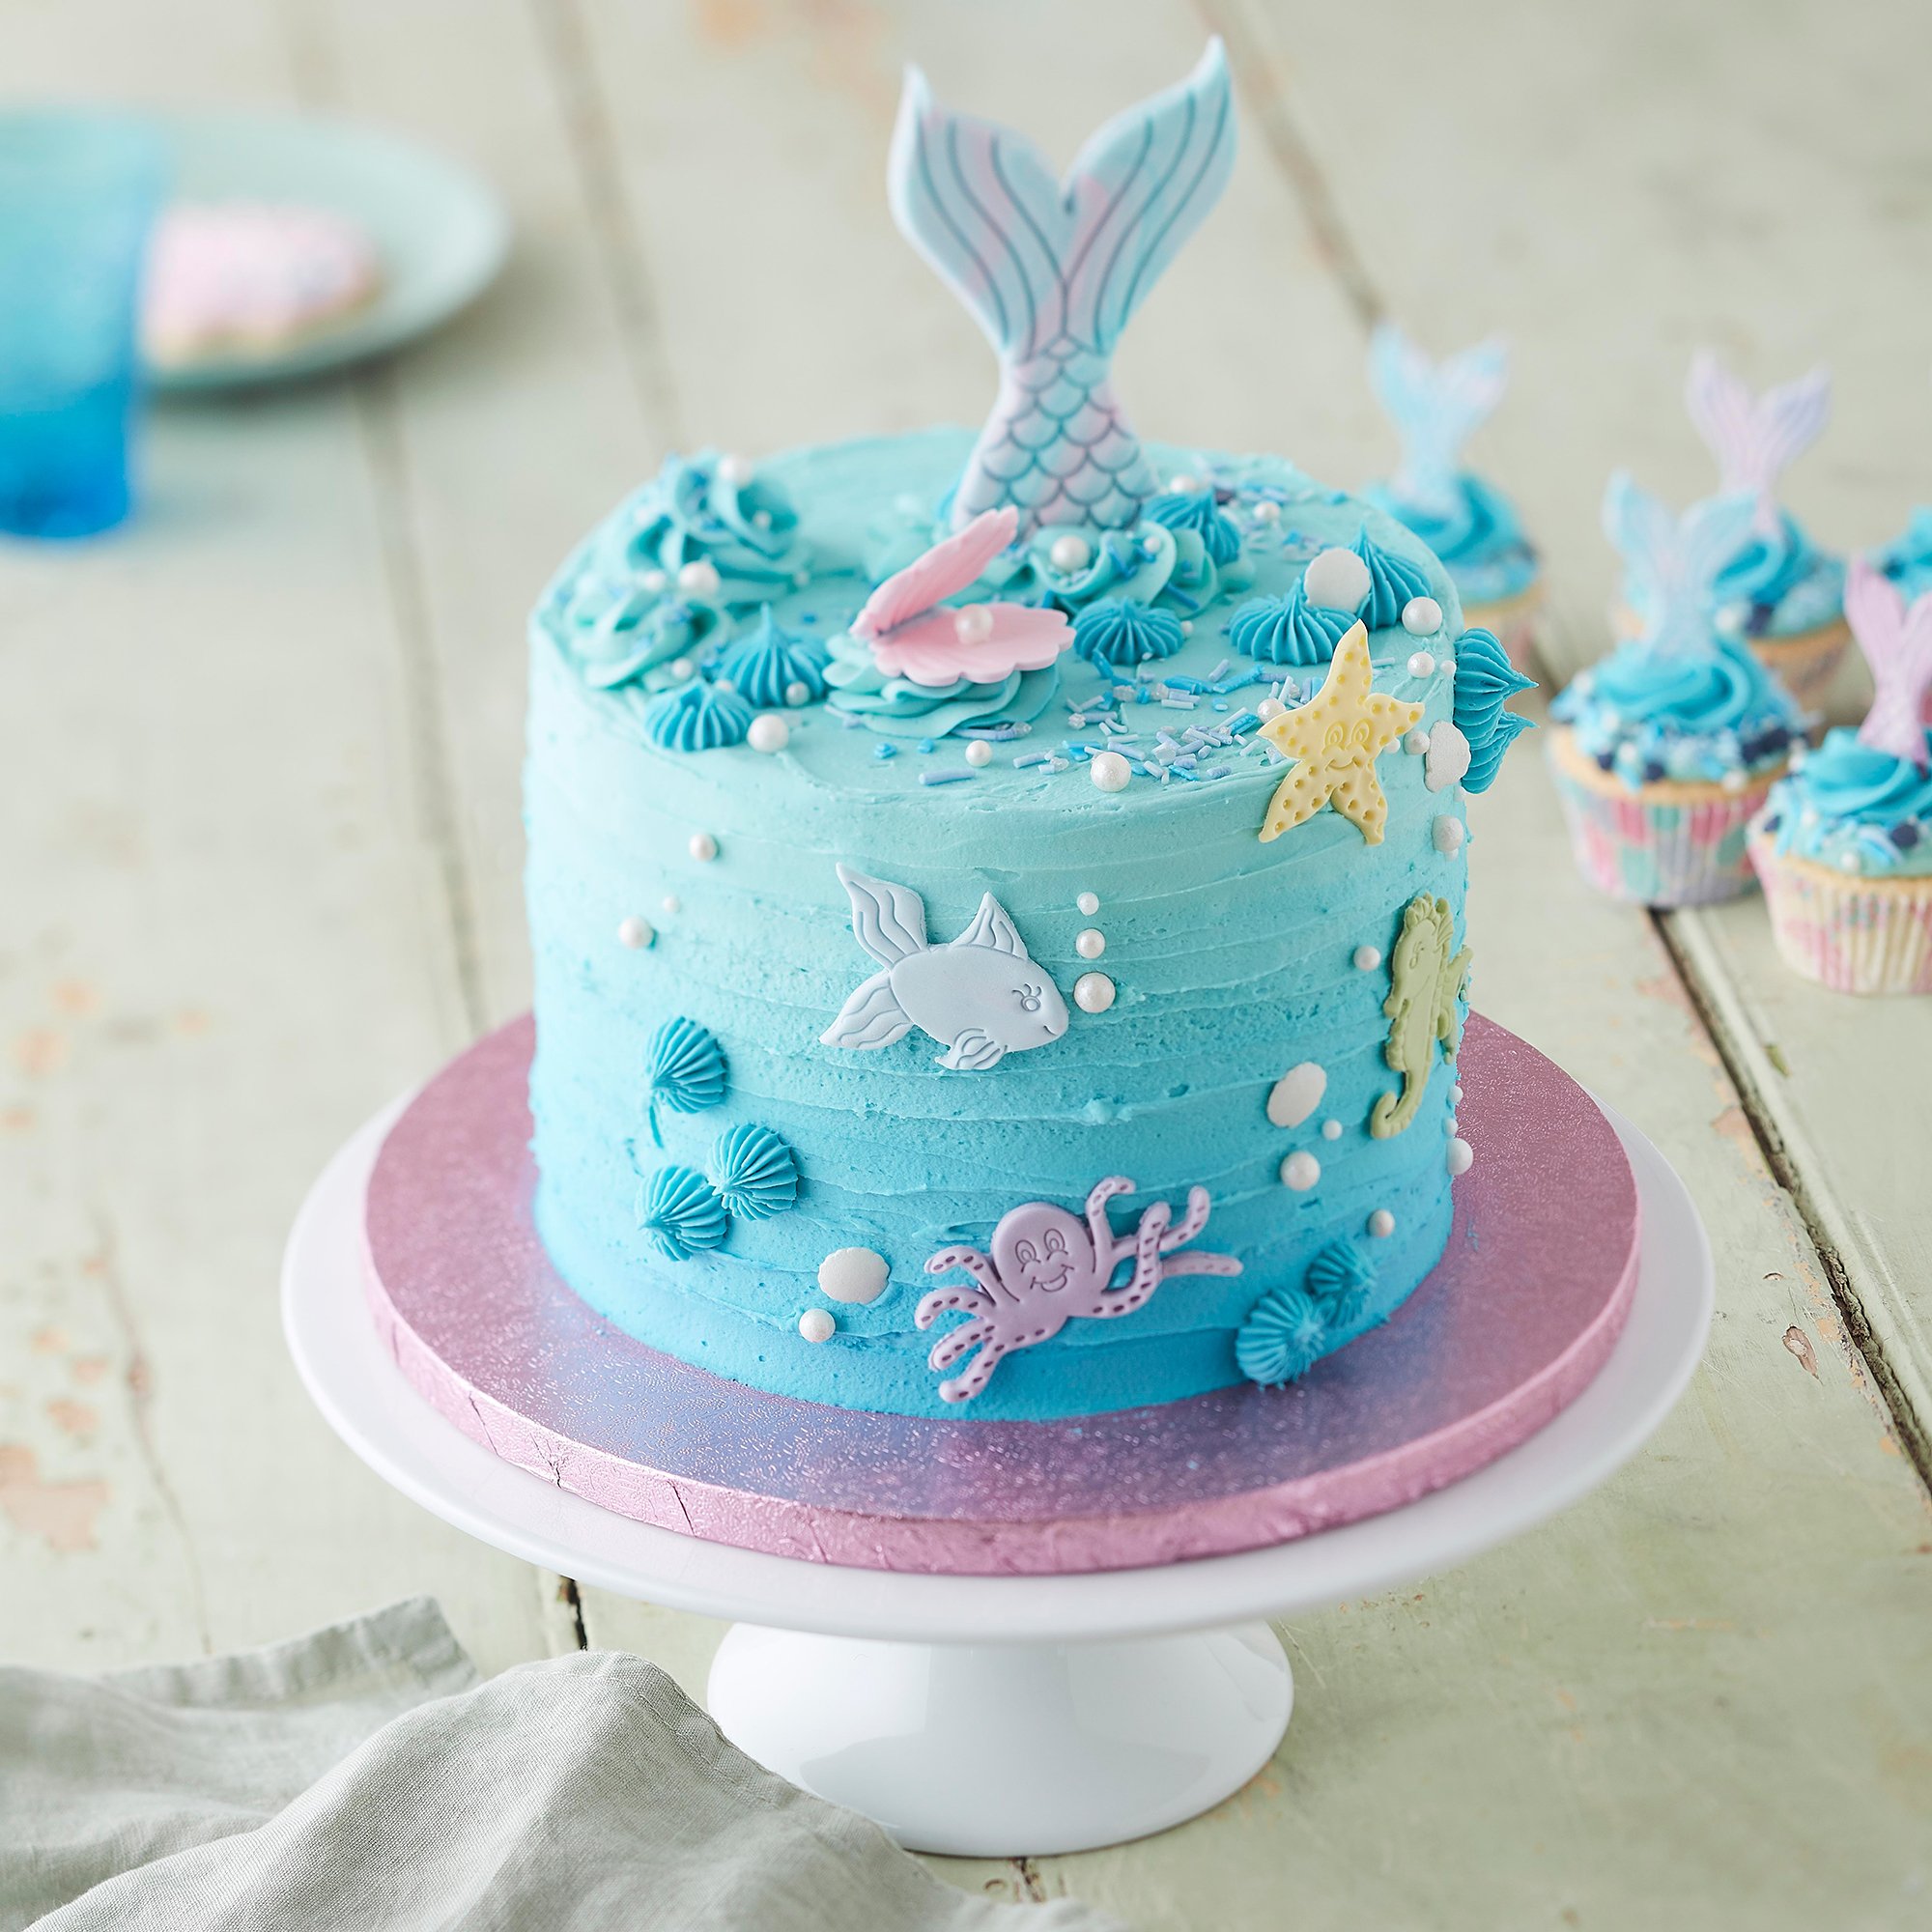 Swimming With Dolphins Cake | Temptations Israel